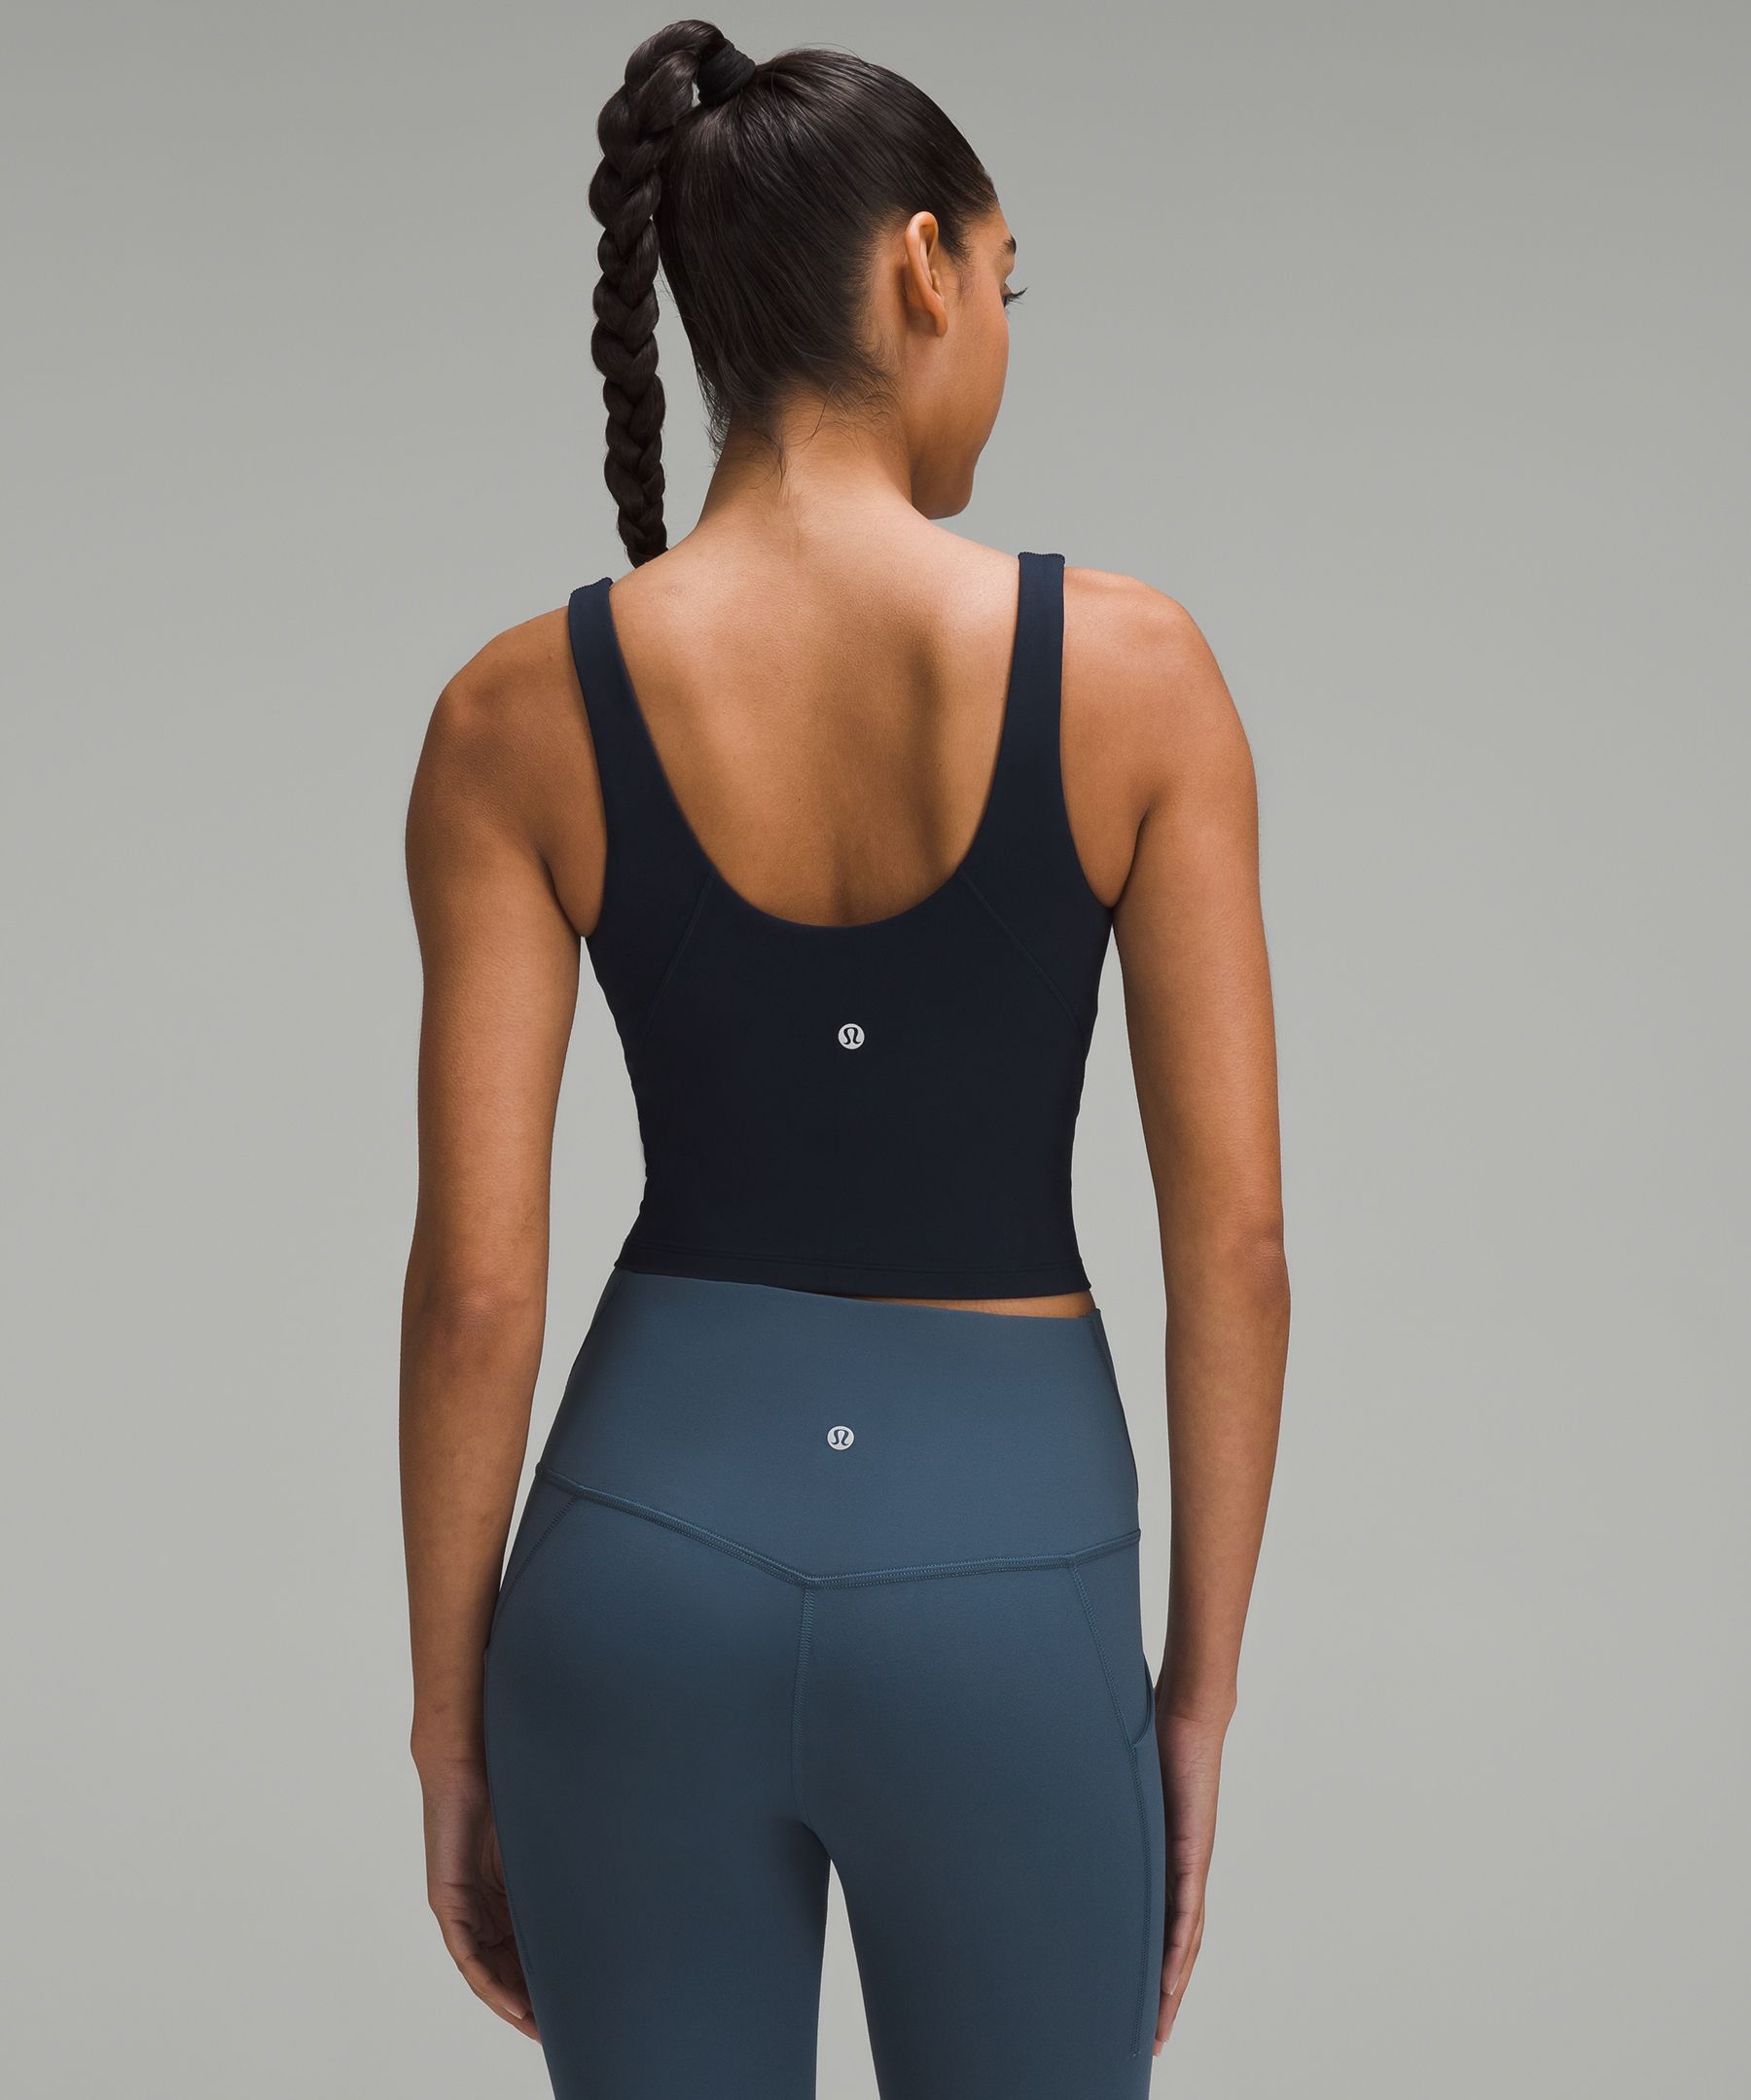 Lululemon Align Tank Pink Size 6 - $48 (29% Off Retail) - From Candice